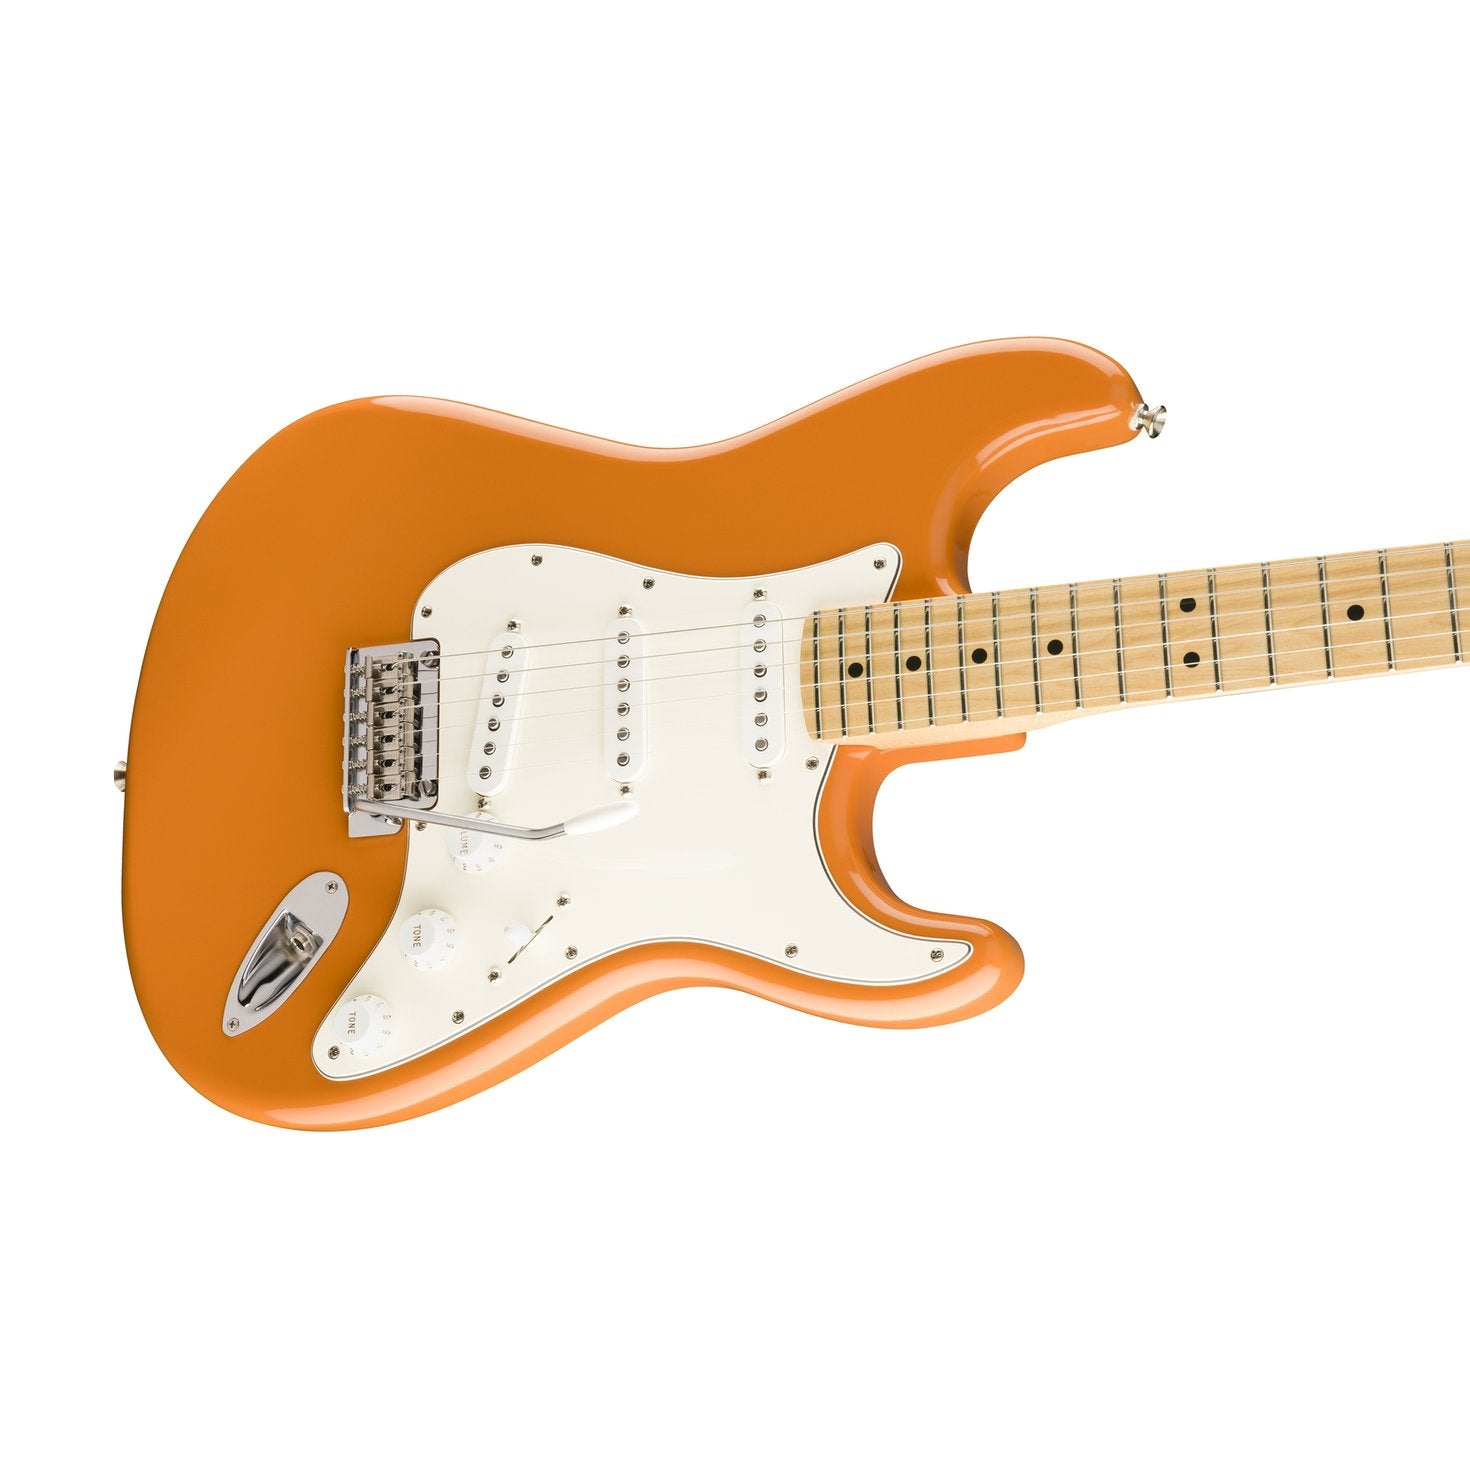 Fender Player Stratocaster Electric Guitar, Maple FB, Capri Orange, FENDER, ELECTRIC GUITAR, fender-eletric-guitar-f03-014-4502-582, ZOSO MUSIC SDN BHD